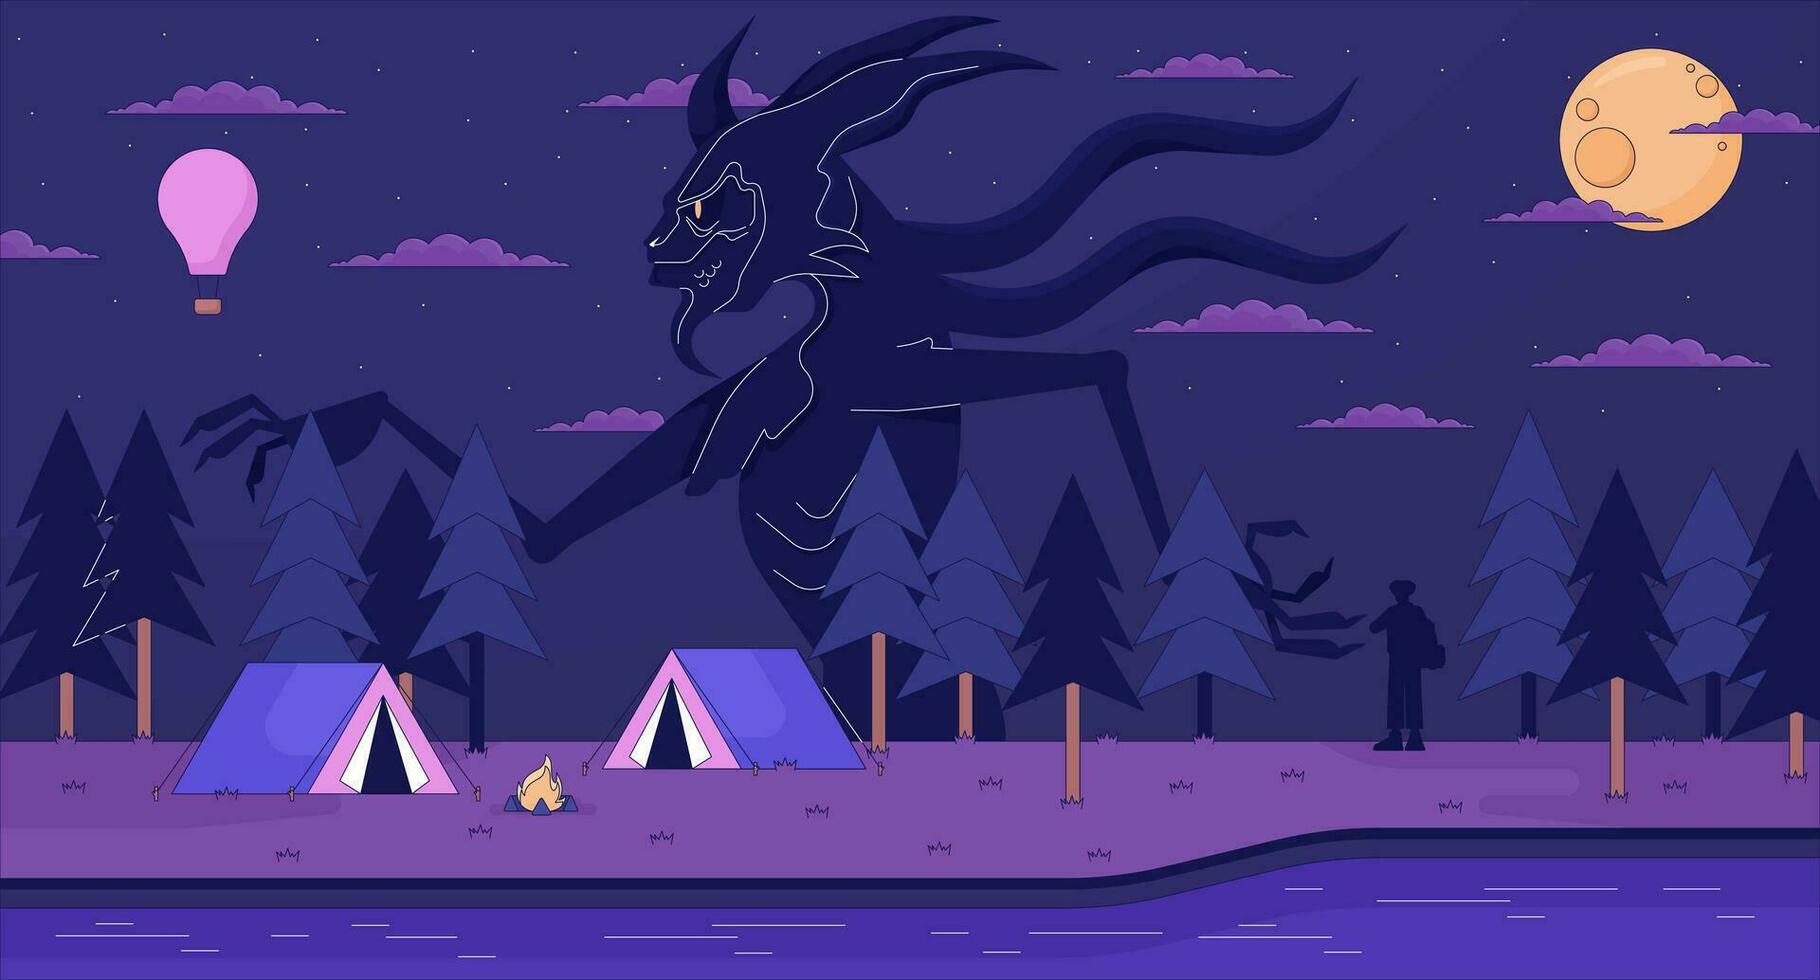 Creepy woods camping site lofi wallpaper. Walking forest monster at campfire 2D scene cartoon flat illustration. River campsite spooky nightmare chill vector art, lo fi aesthetic colorful background Vector Art